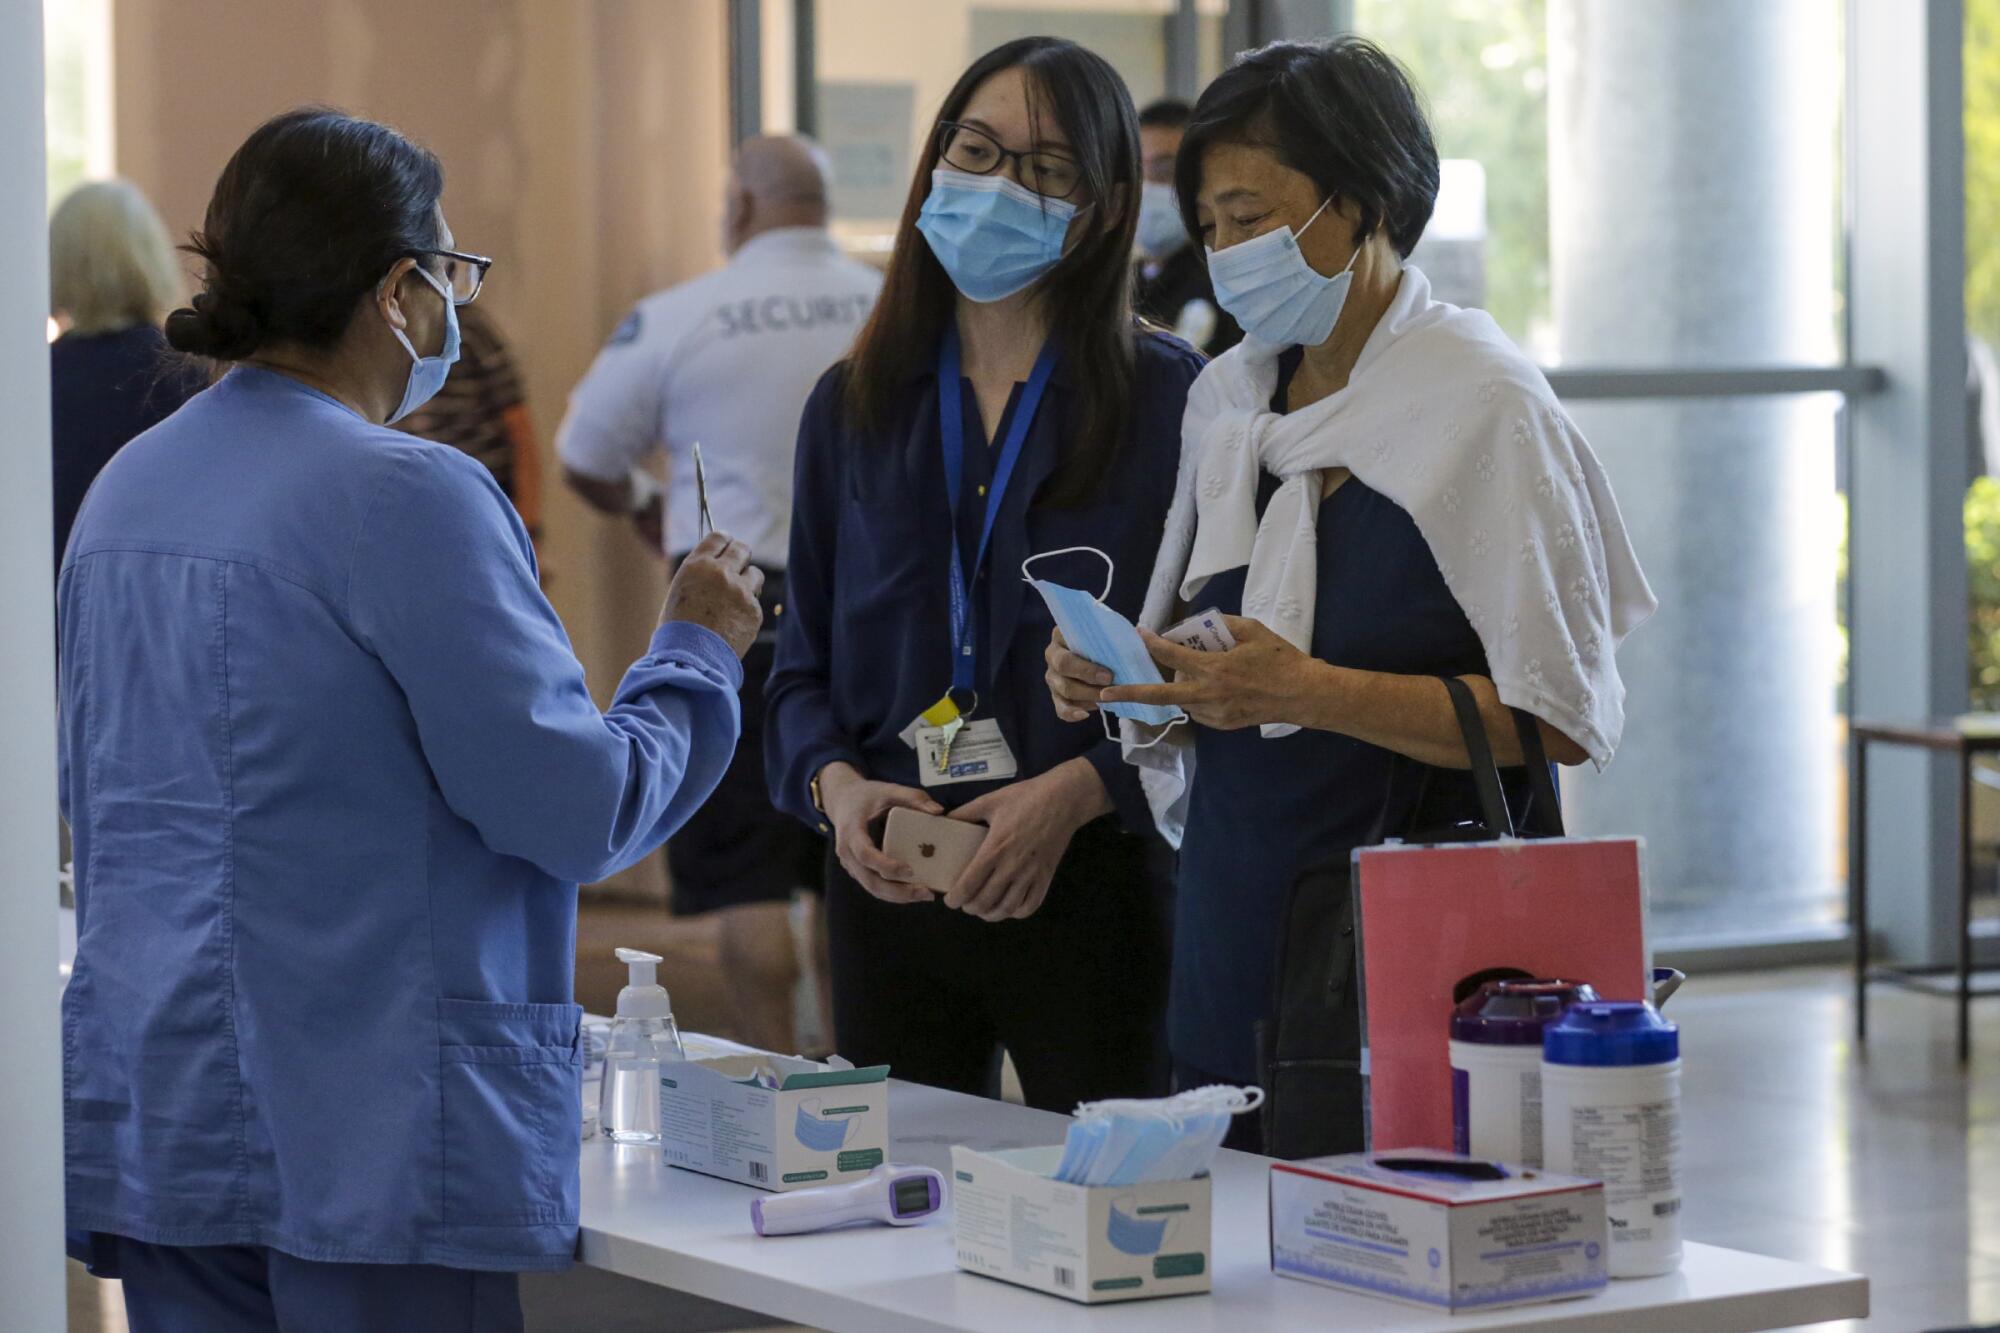 Whitney Cheng, left, escorts Yuyuan Lin through screening upon her arrival for chemotherapy at City of Hope Hospital